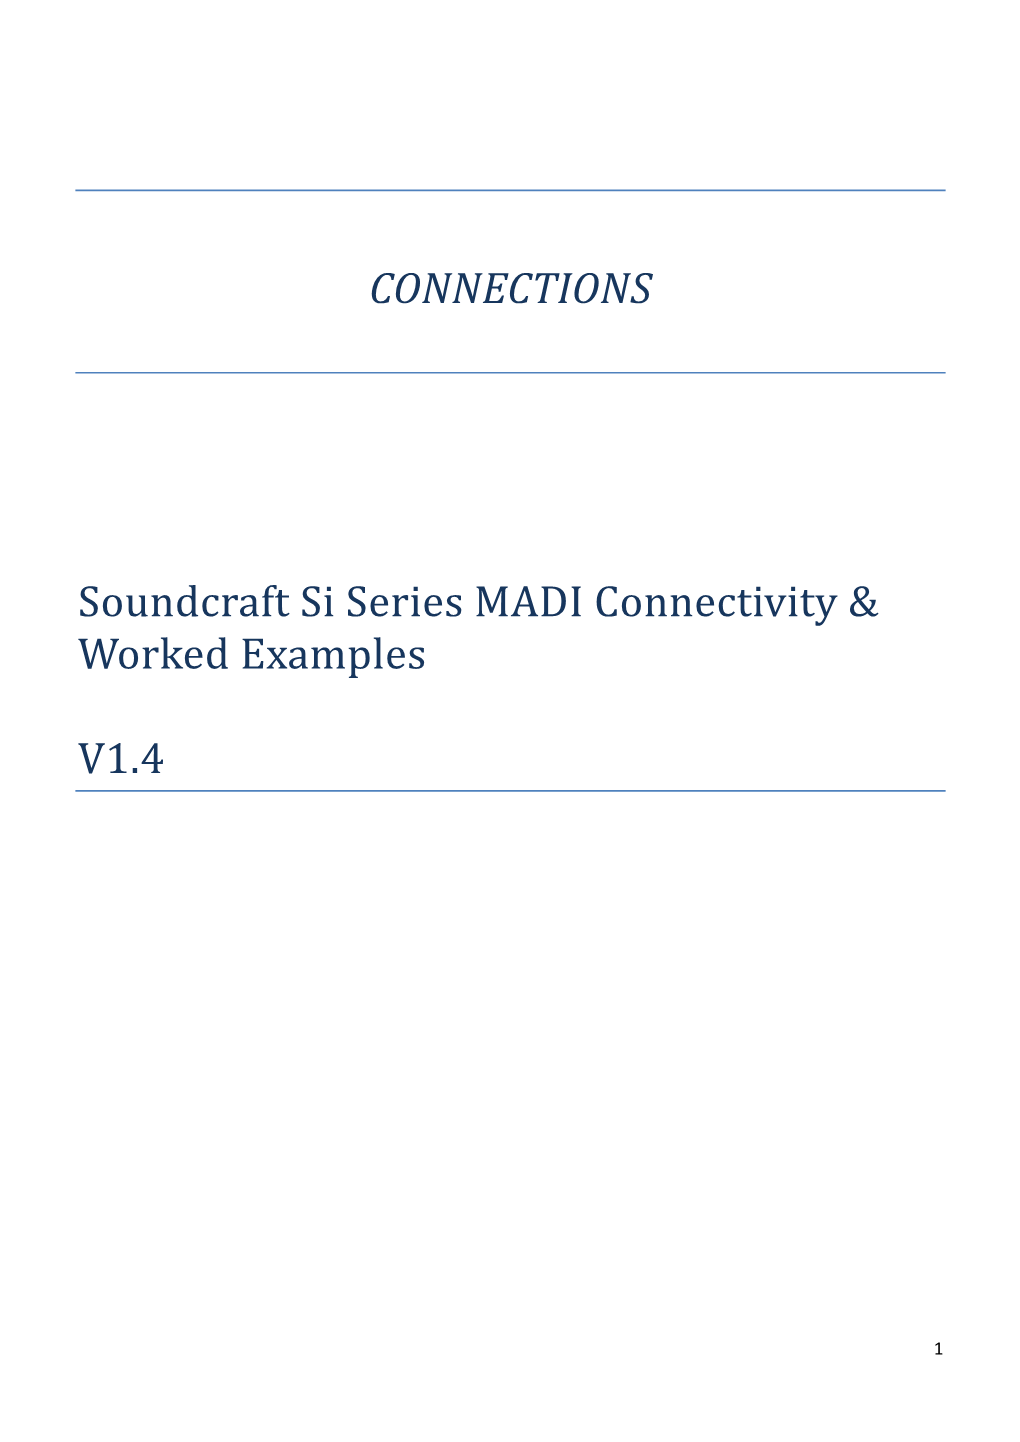 CONNECTIONS Soundcraft Si Series MADI Connectivity & Worked